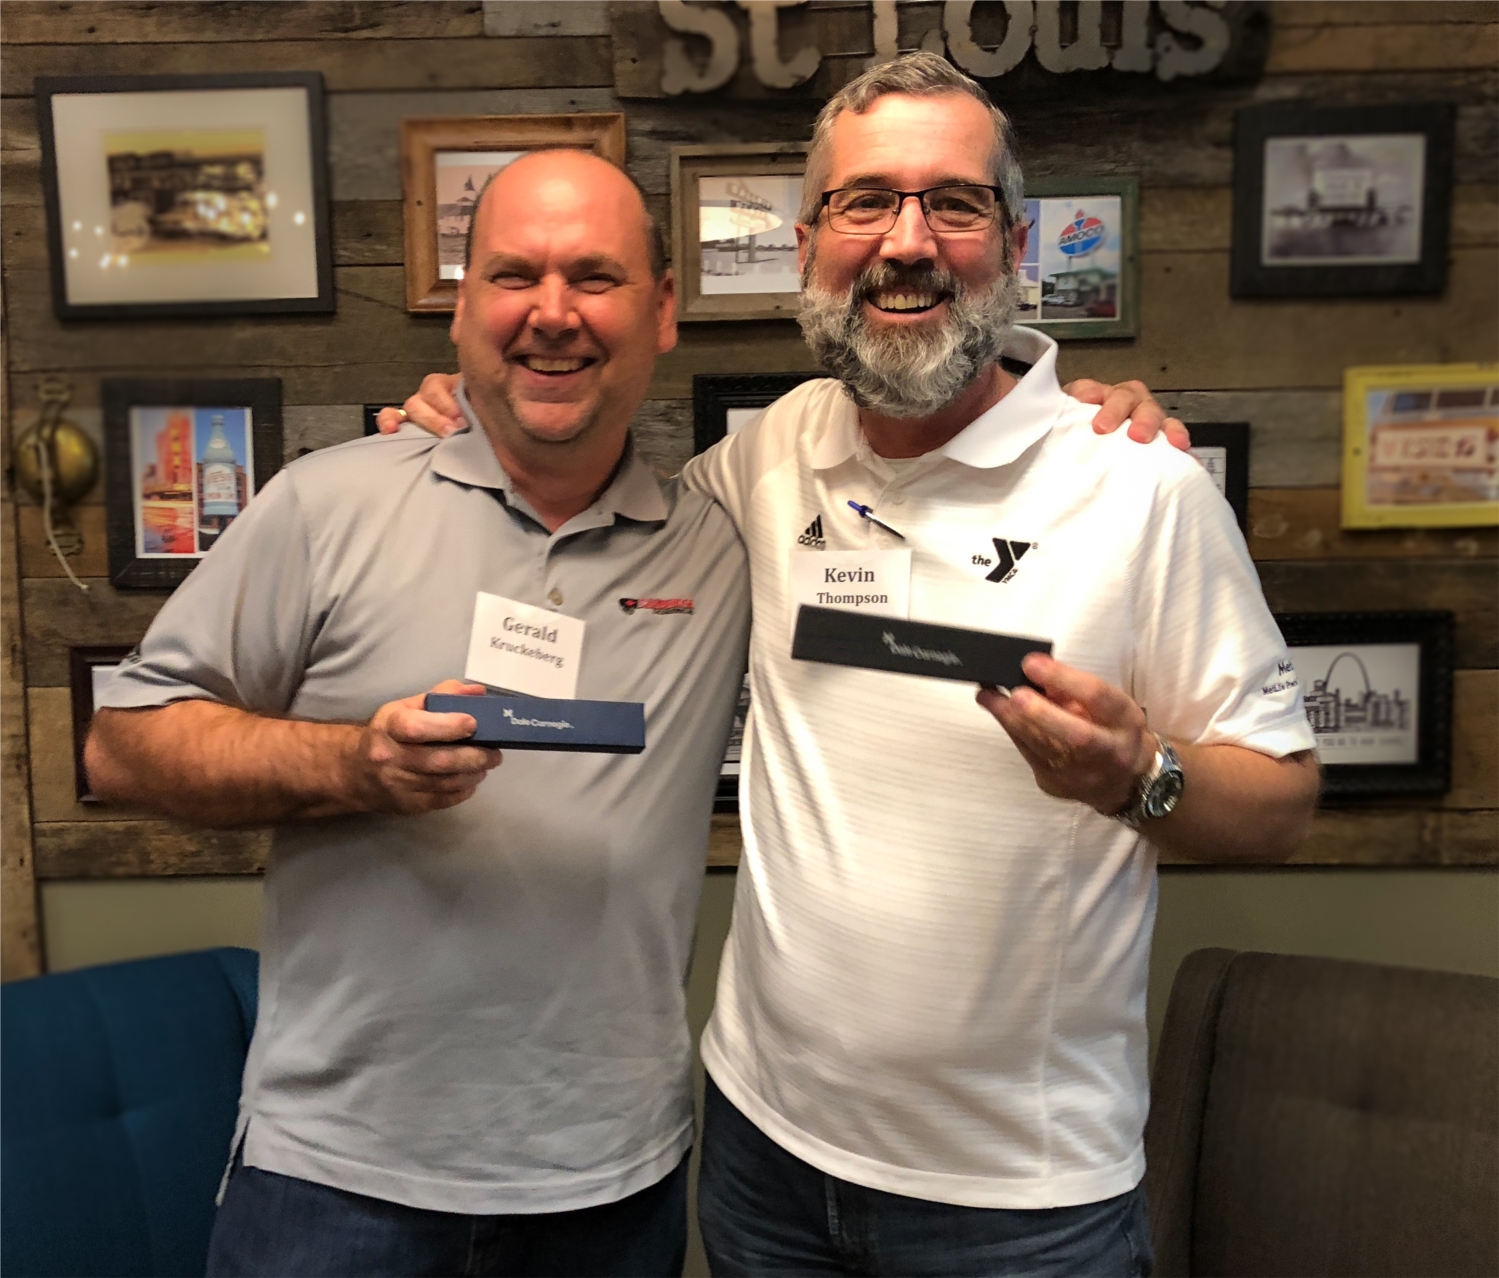 Gerald Kruckeberg and Kevin Thompson accept their peer-awarded growth awards during the Dale Carnegie leadership training course. In 2019, all 150+ employees of Cambridge Air Solutions completed this course for personal and professional develoment.